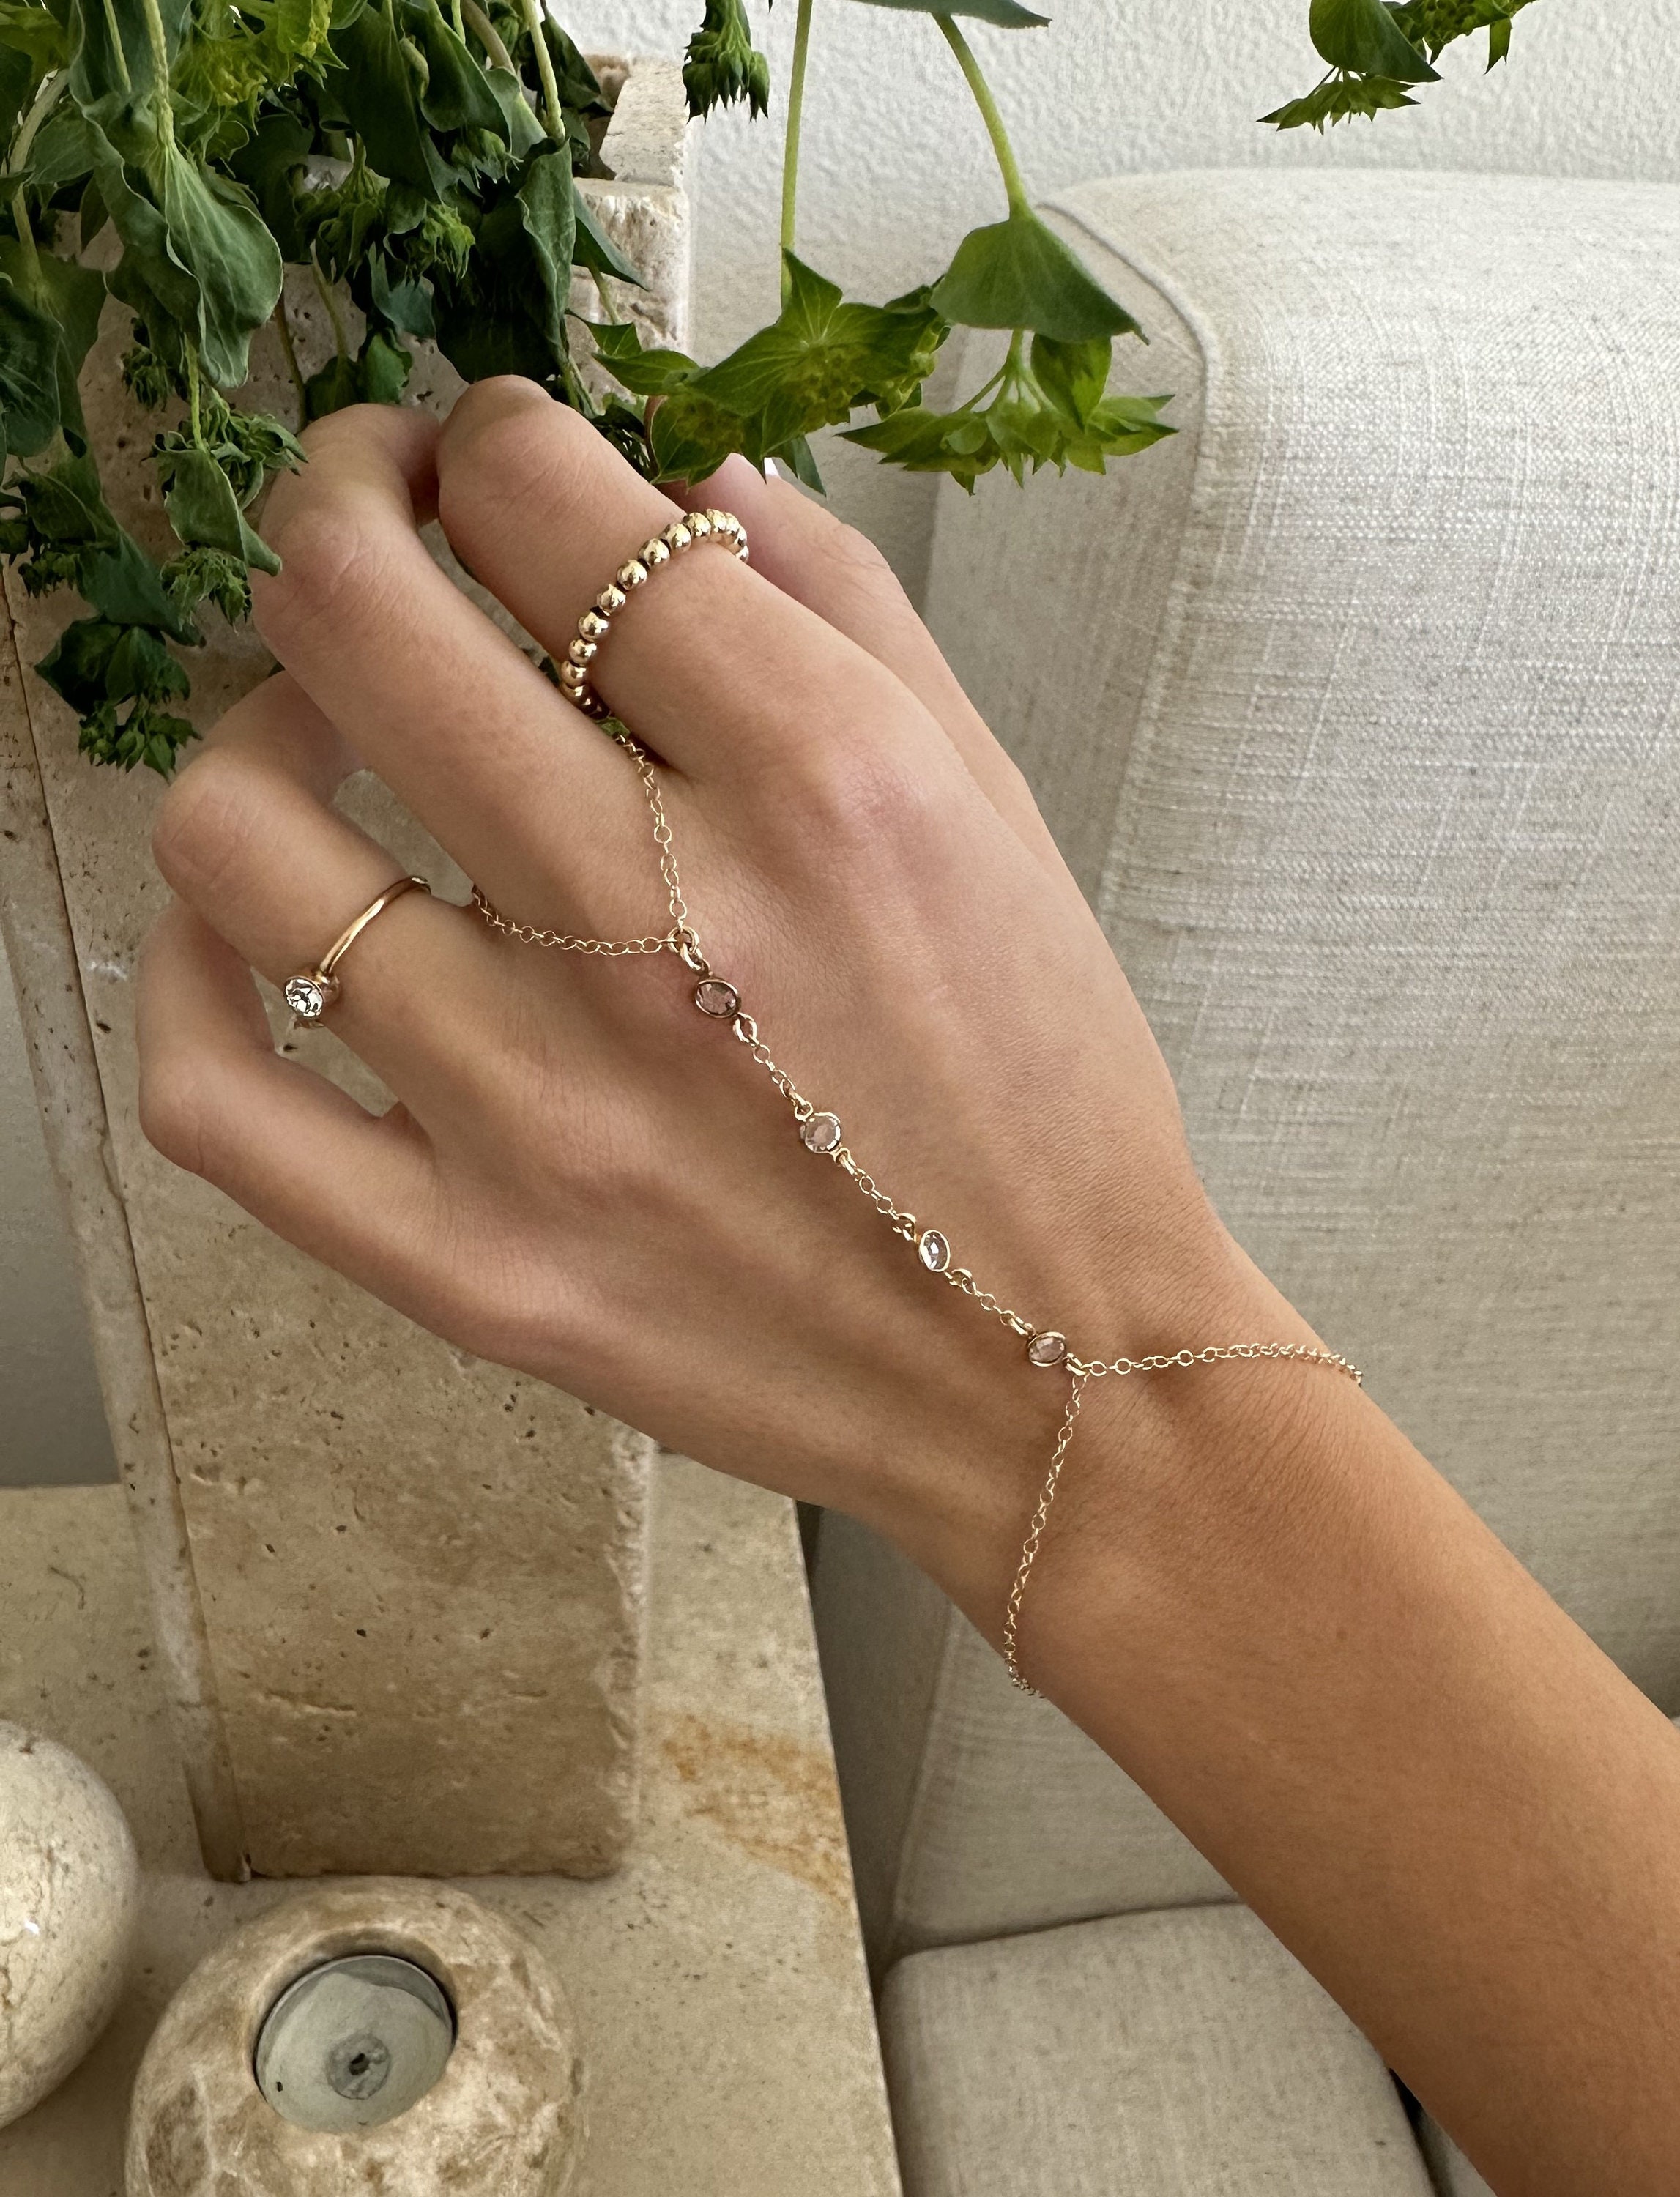 65 Hottest Hand Back Jewelry Pieces | Hand chain bracelet, Hand chain  jewelry, Chain tassel bracelet